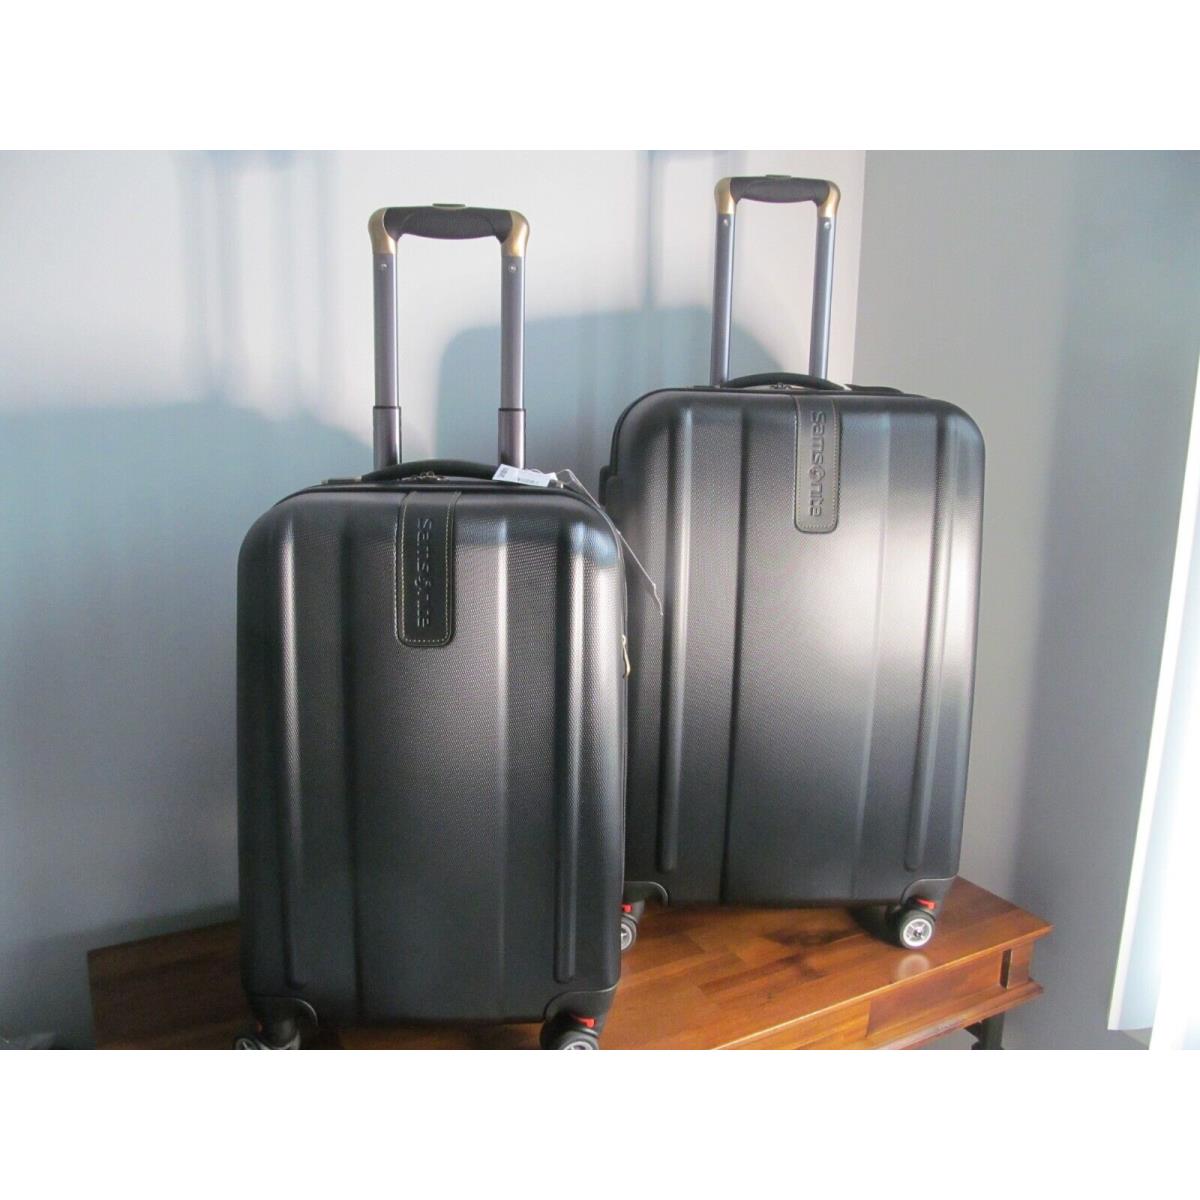 Samsonite Luggage Set-extended Trip Black Carry On Check In Packing Cases